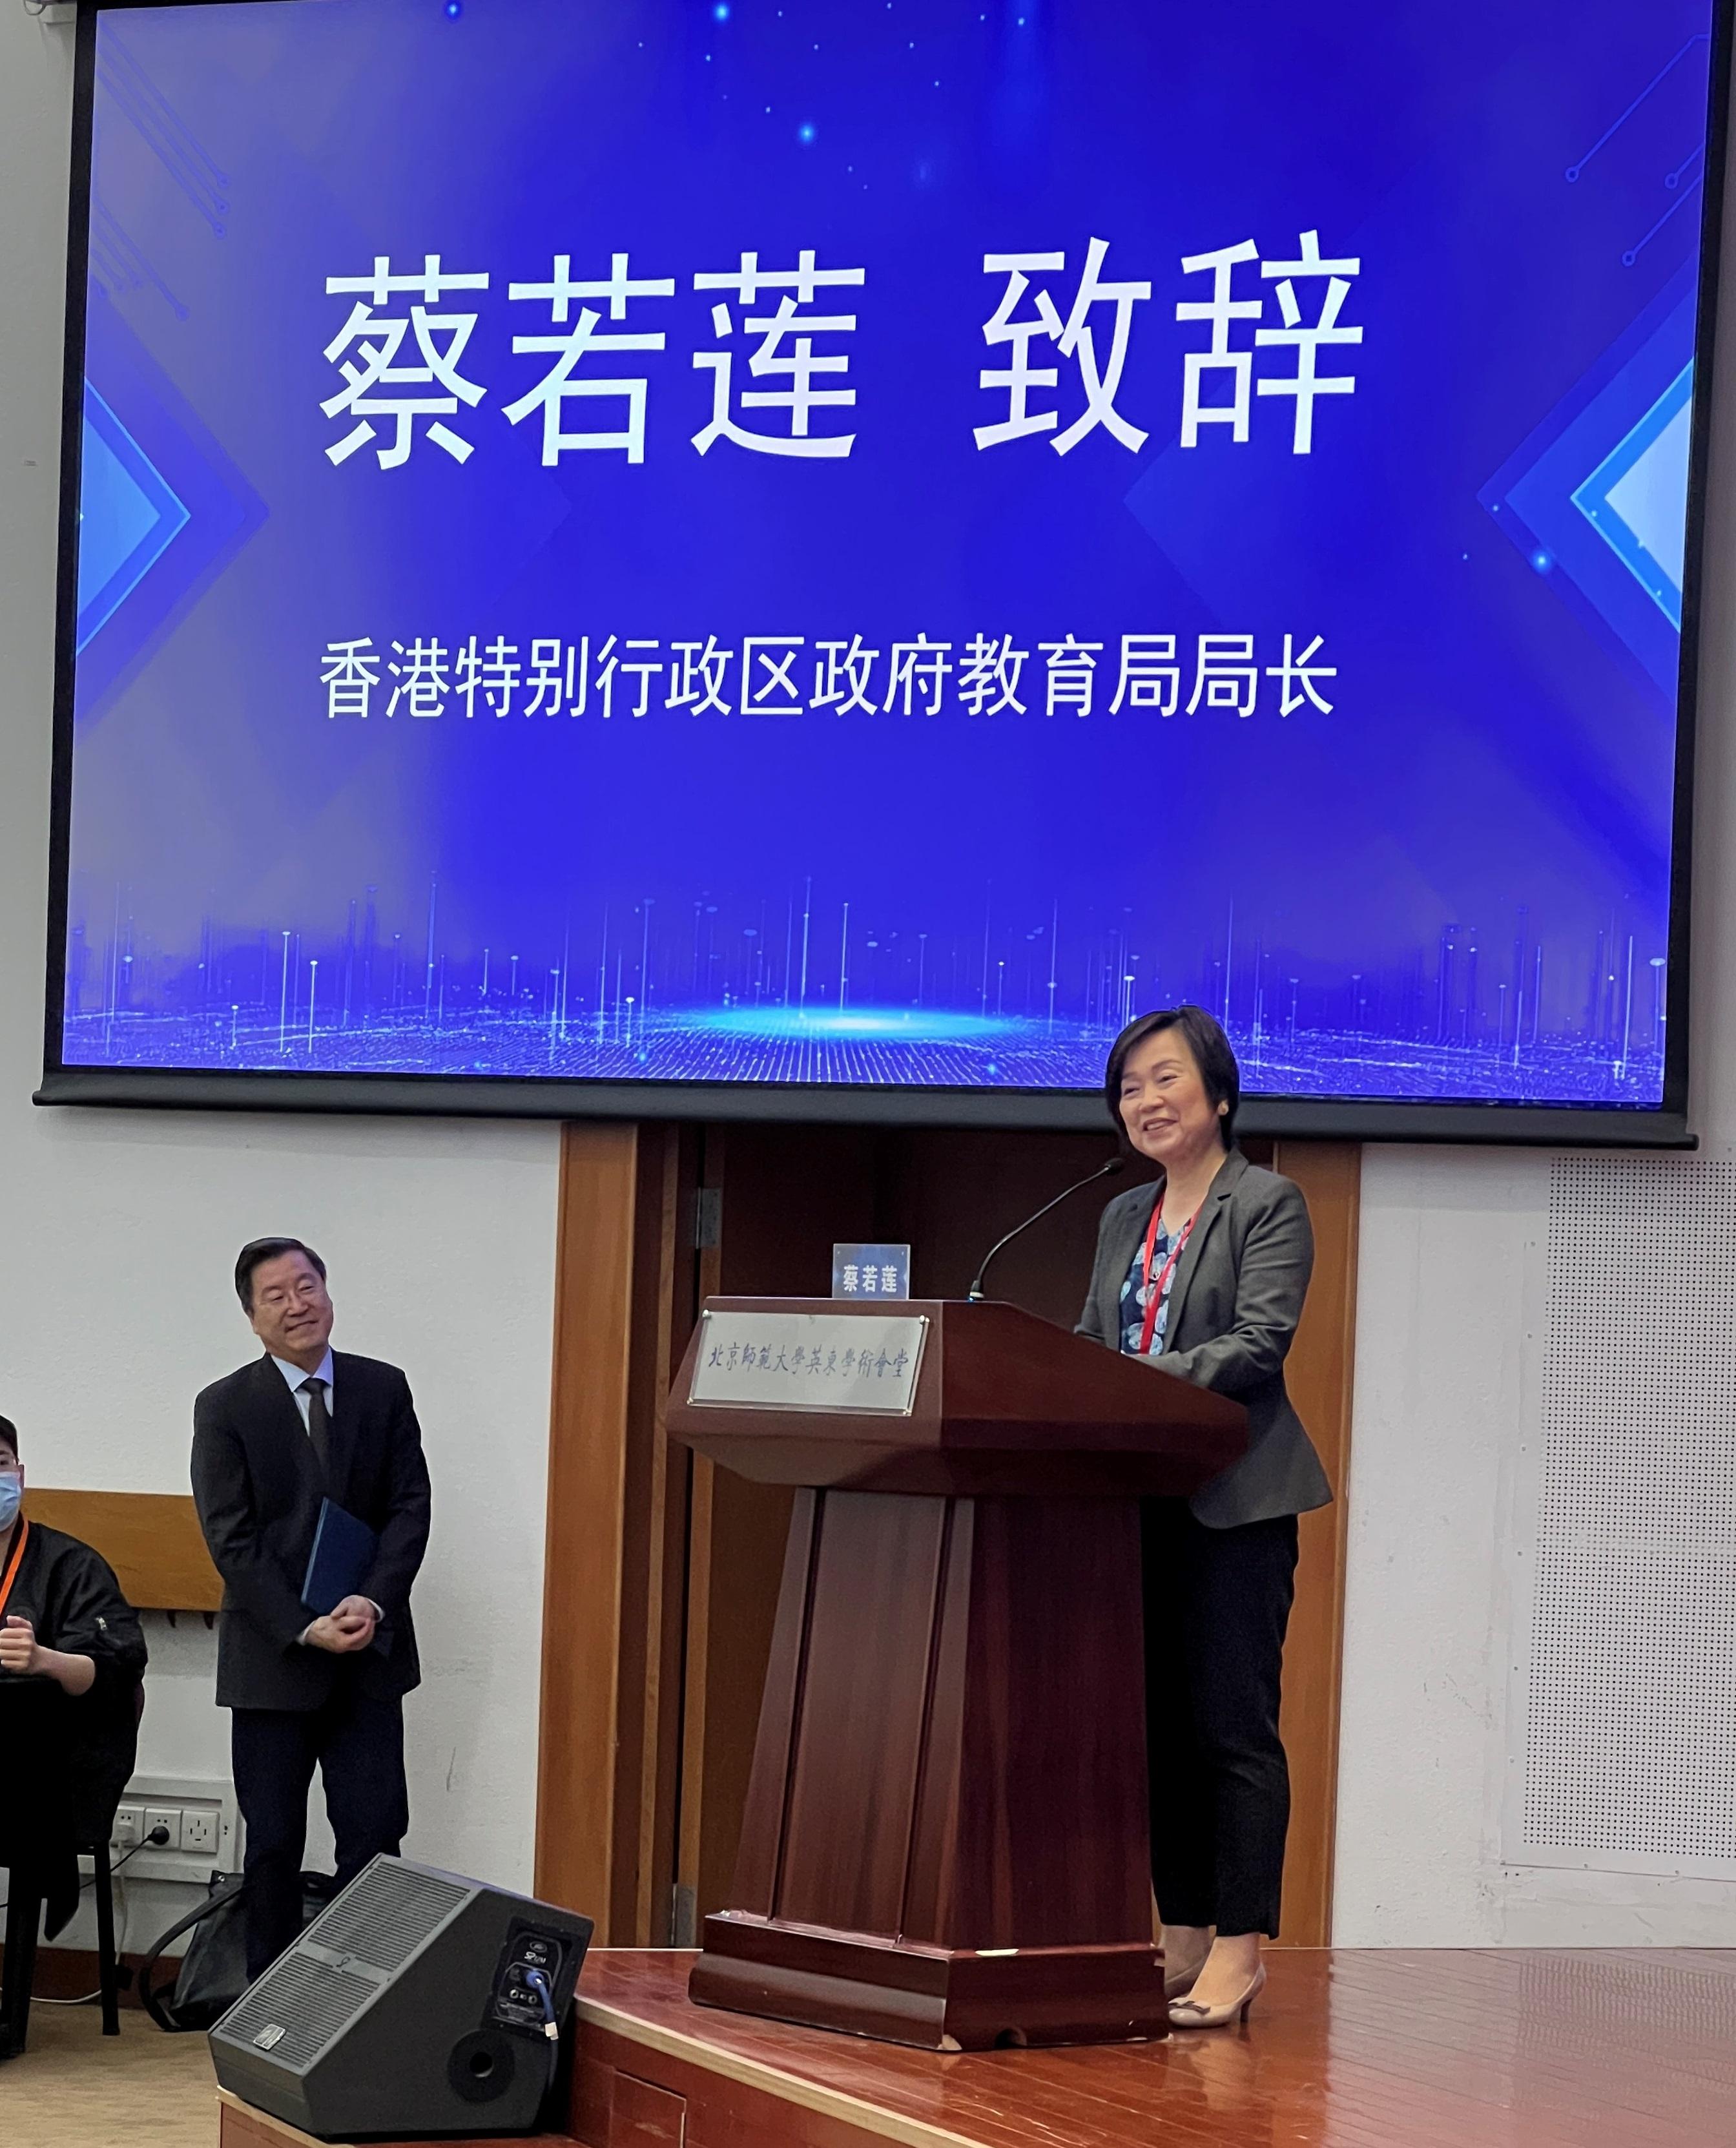 The Secretary for Education, Dr Choi Yuk-lin (right), addresses the Joint Opening Ceremony of the Leadership Enhancement Programme for Primary and Secondary School Principals and the Mainland Study Tour for Newly-joined Teachers at Beijing Normal University today (May 16).
